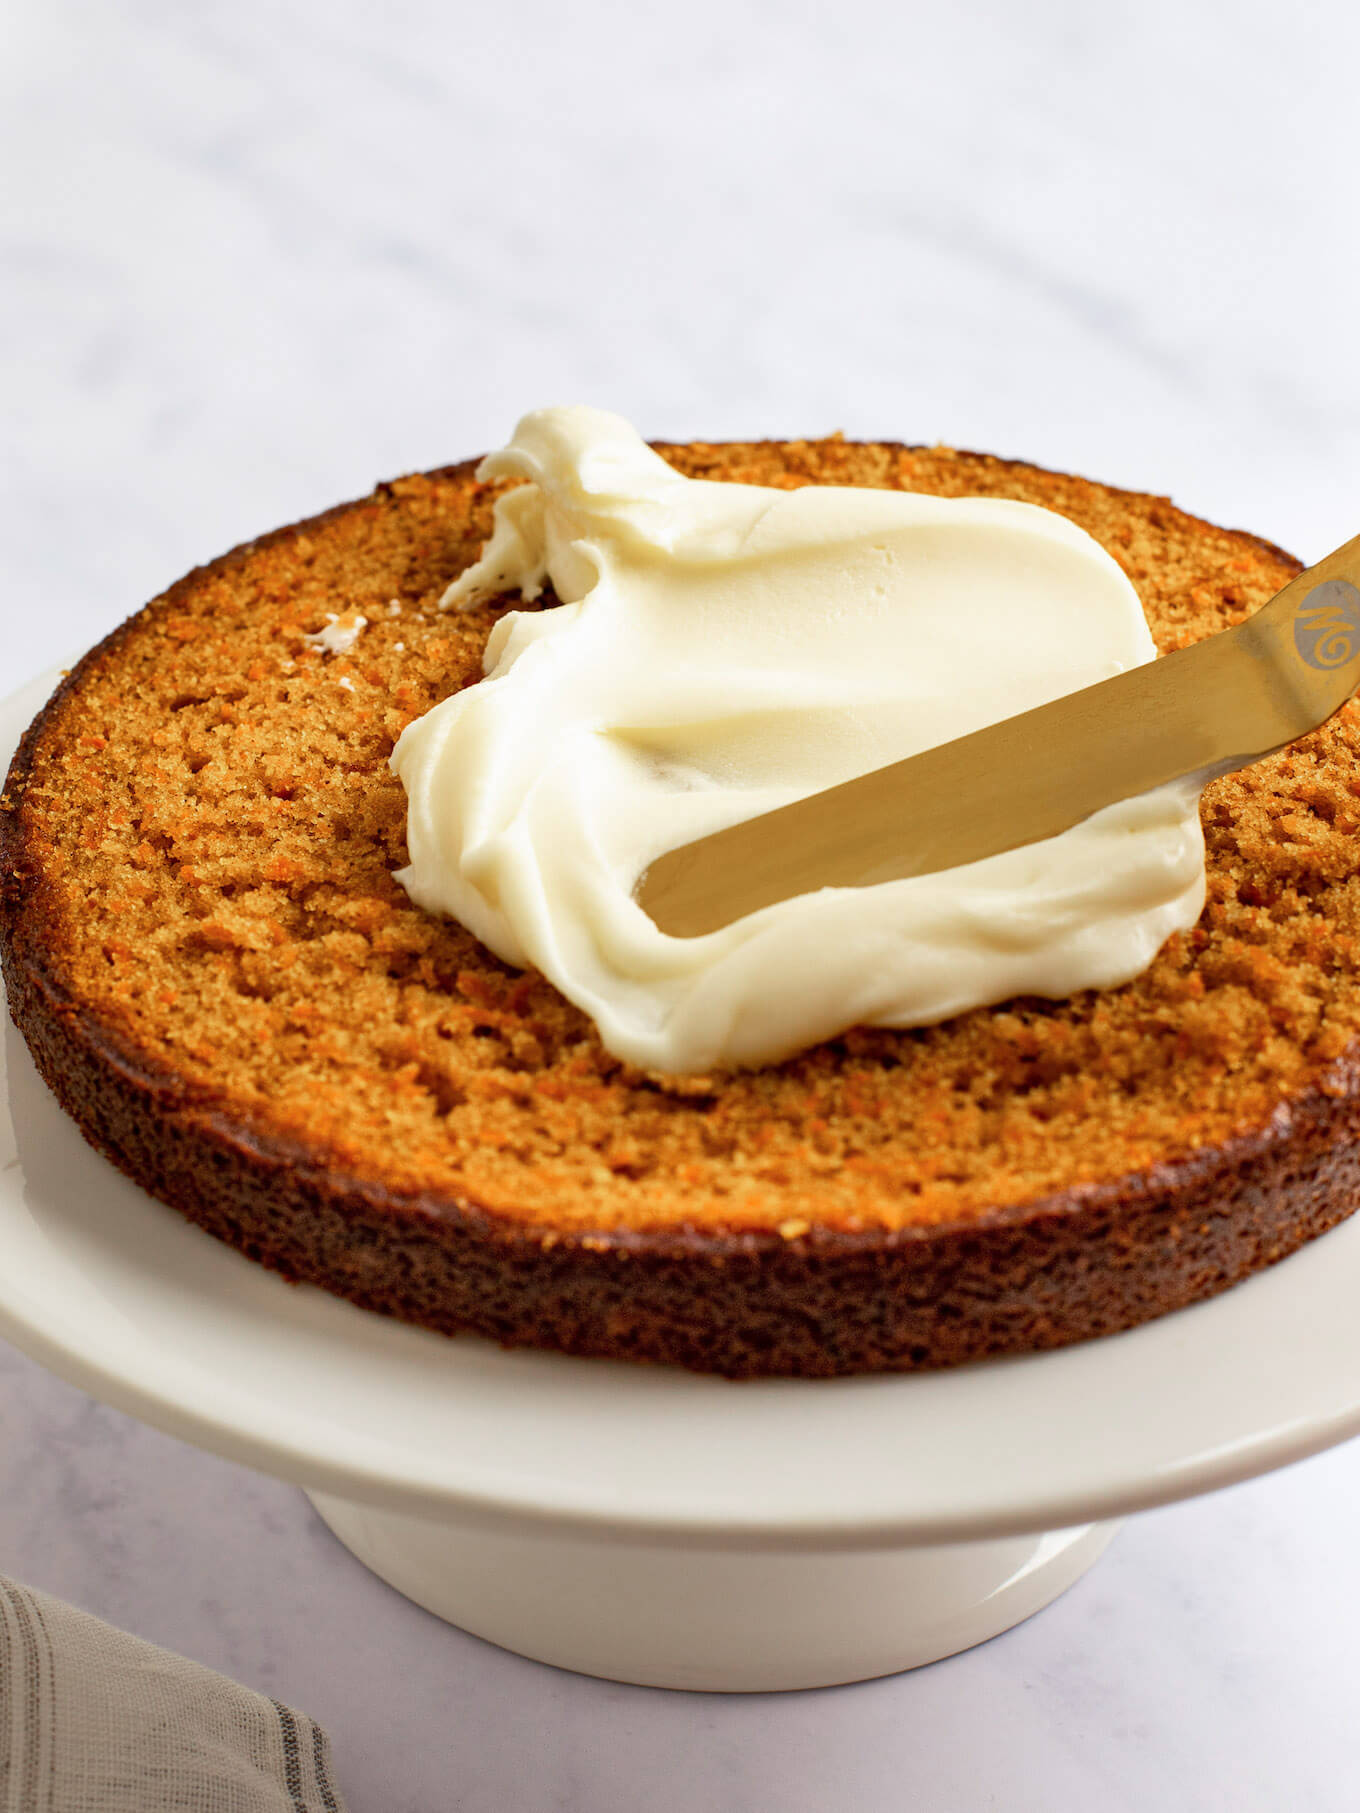 A slice of carrot cake on a cake stand. Cream cheese frosting is being spread around the cake layer.